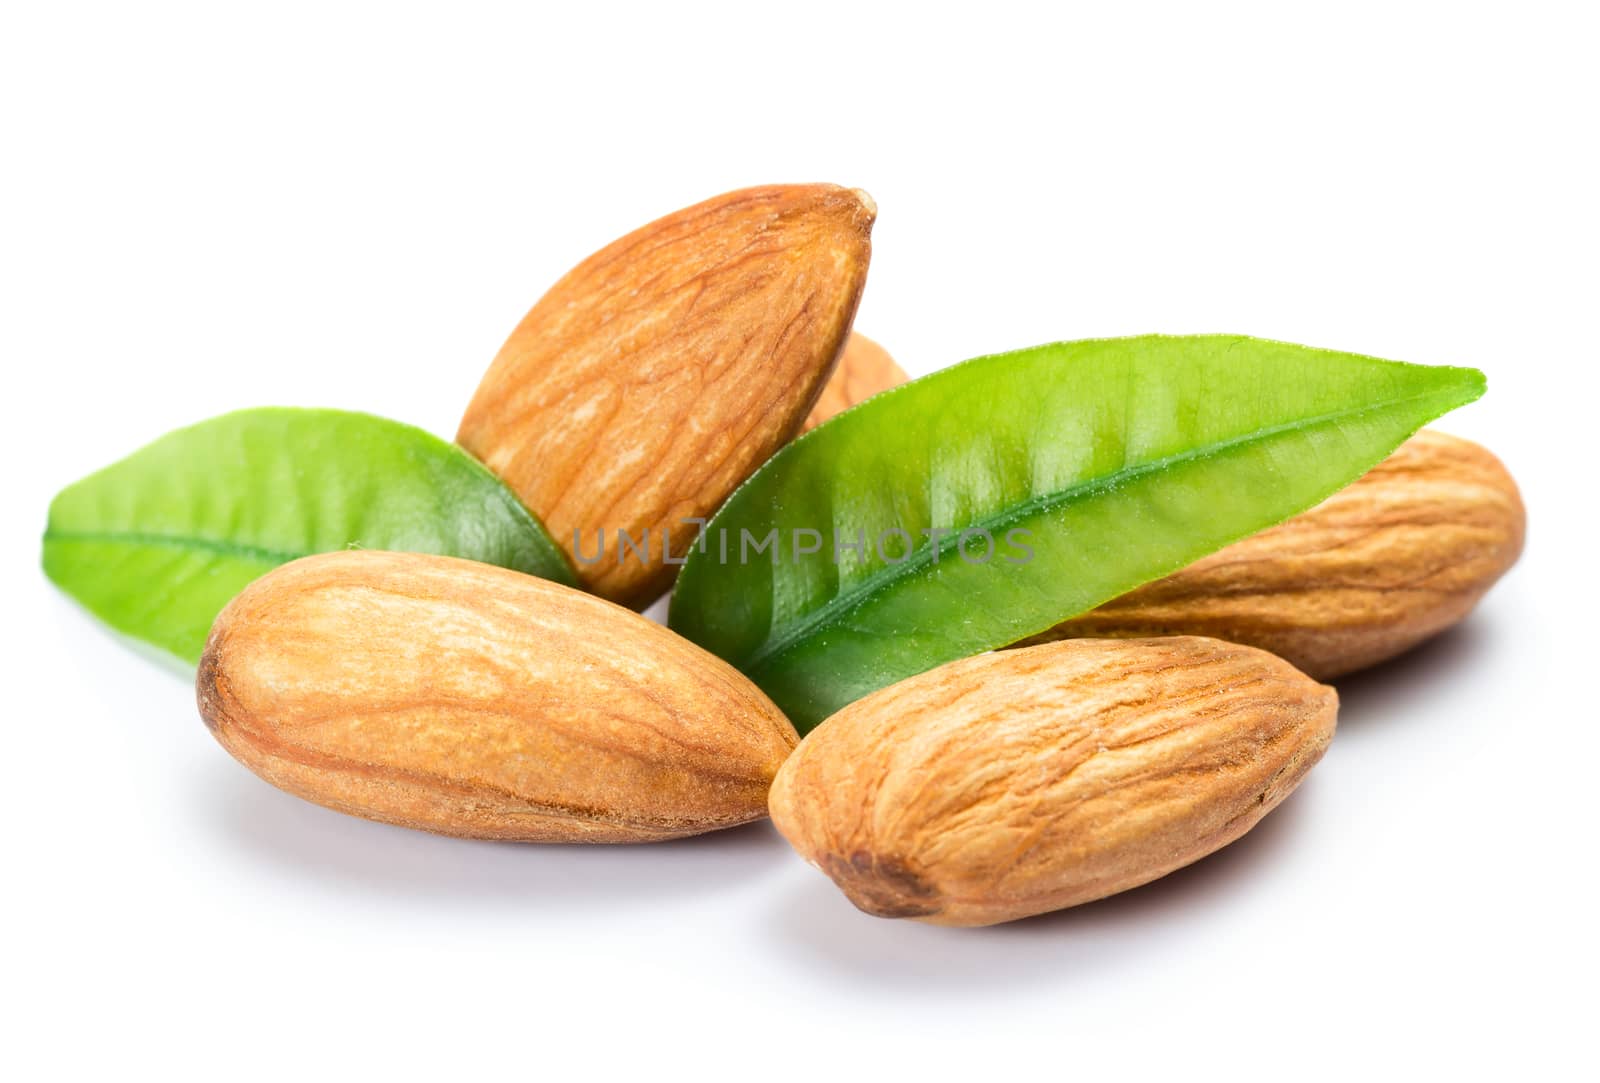 Almonds with leaves by Valengilda